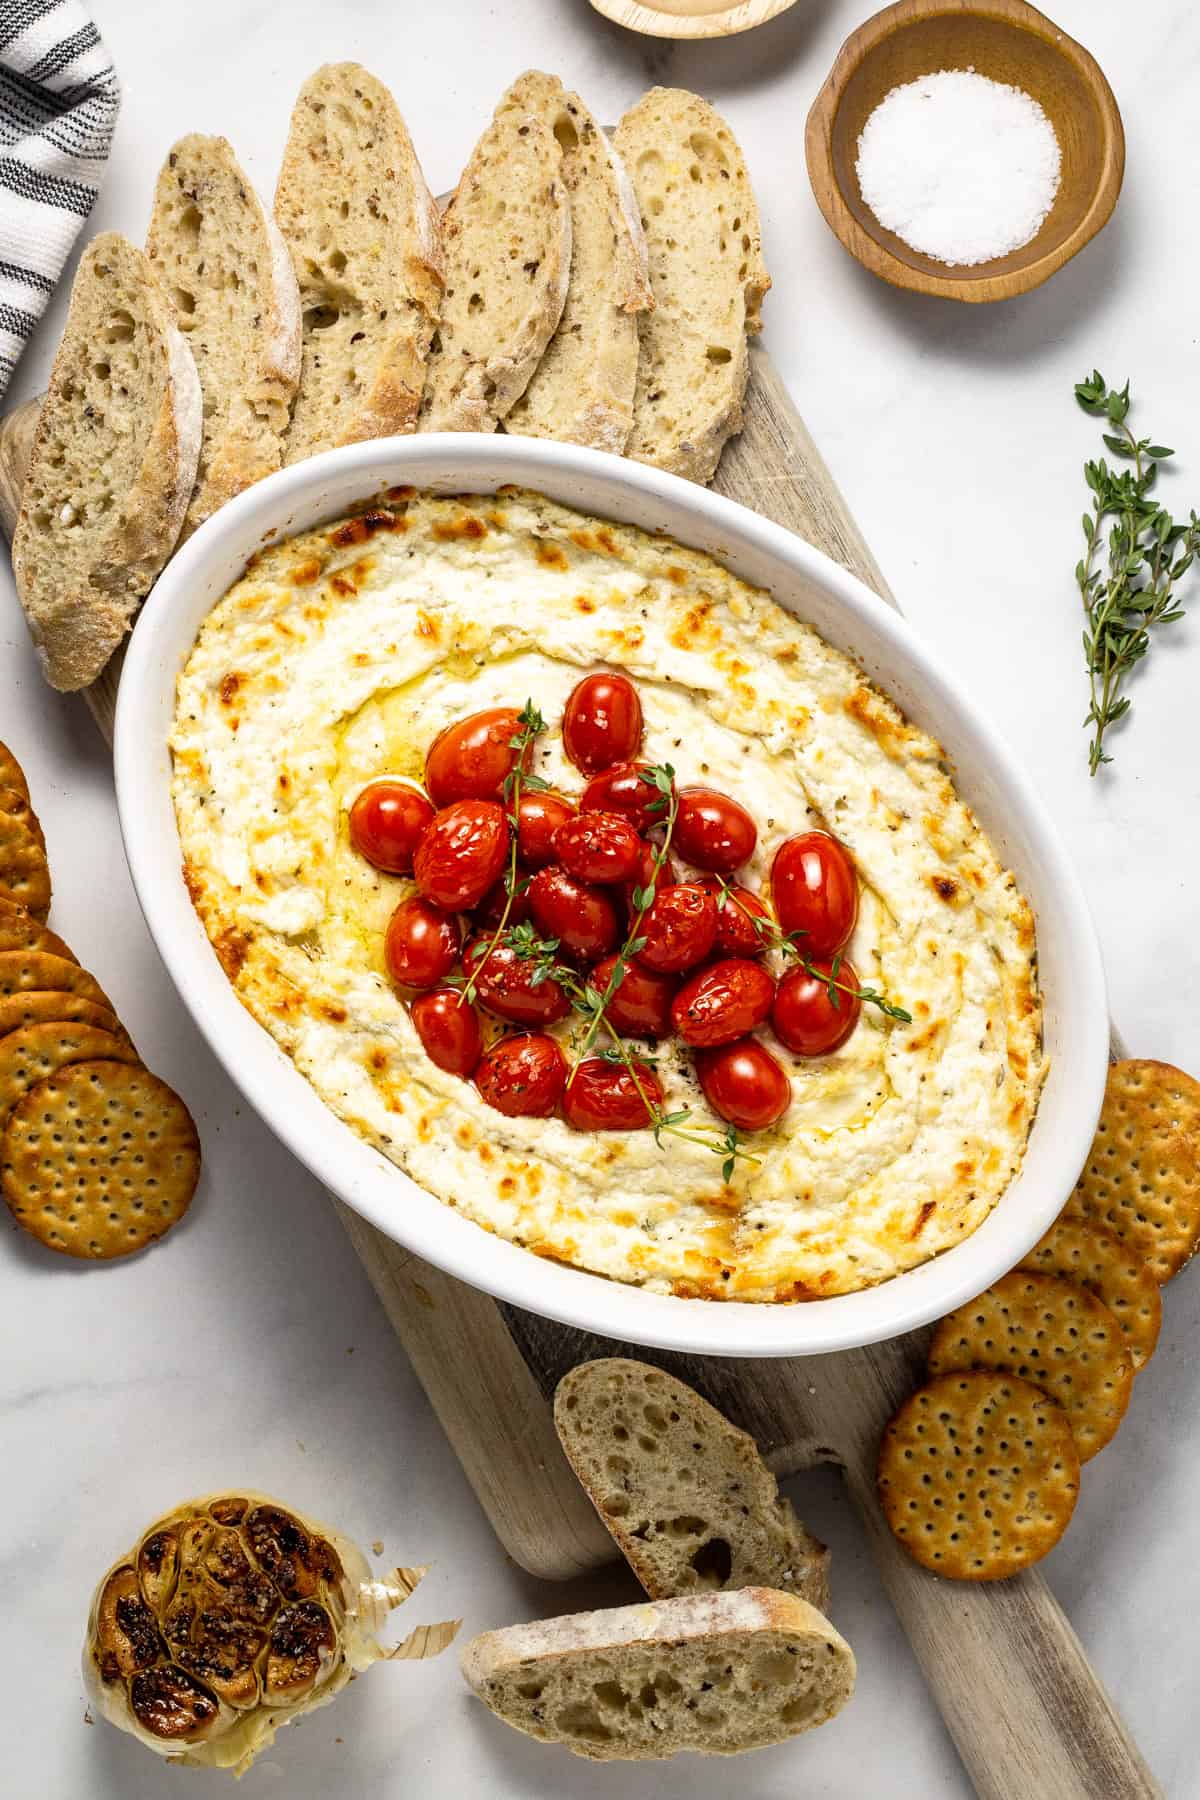 Overshot shot of baked goat cheese dip garnished with roasted tomatoes and fresh thyme